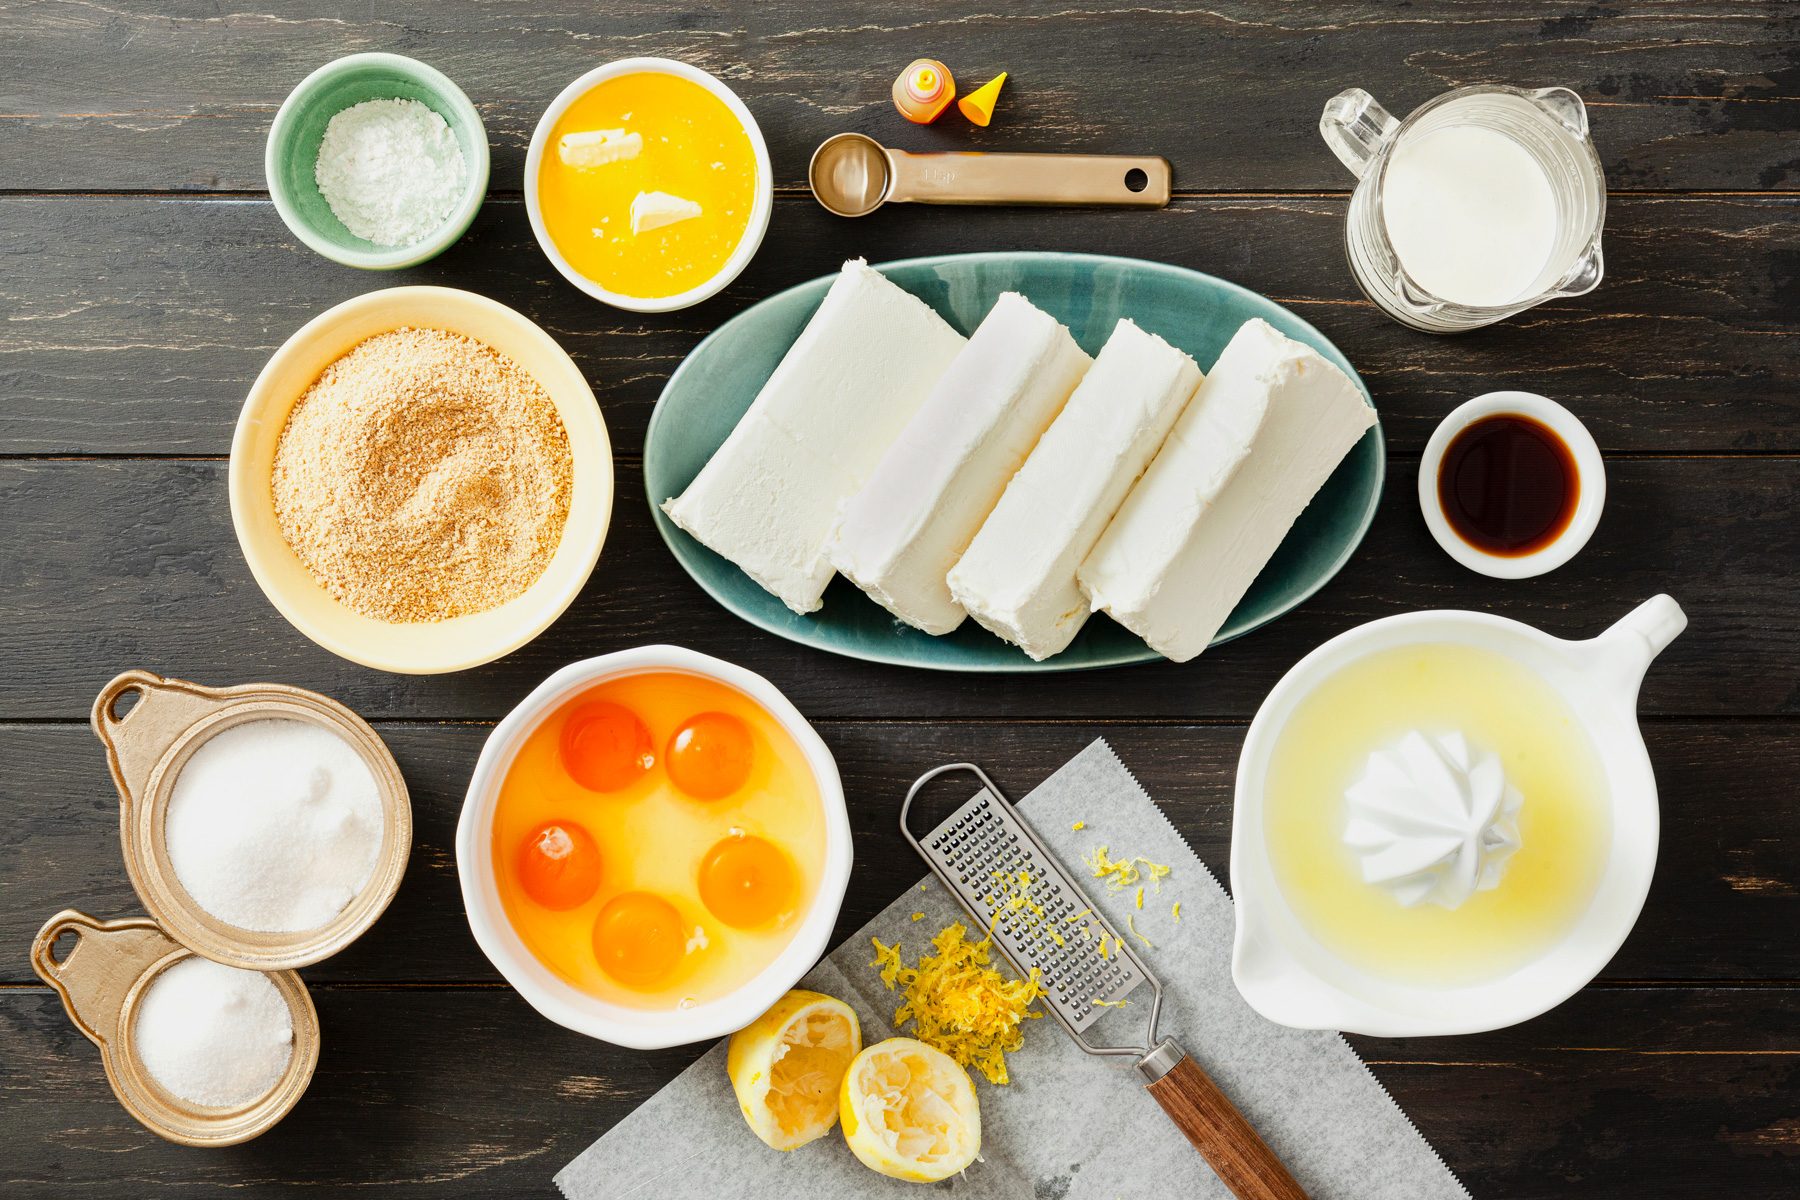 Ingredients for Lemon Cheesecake on wooden table